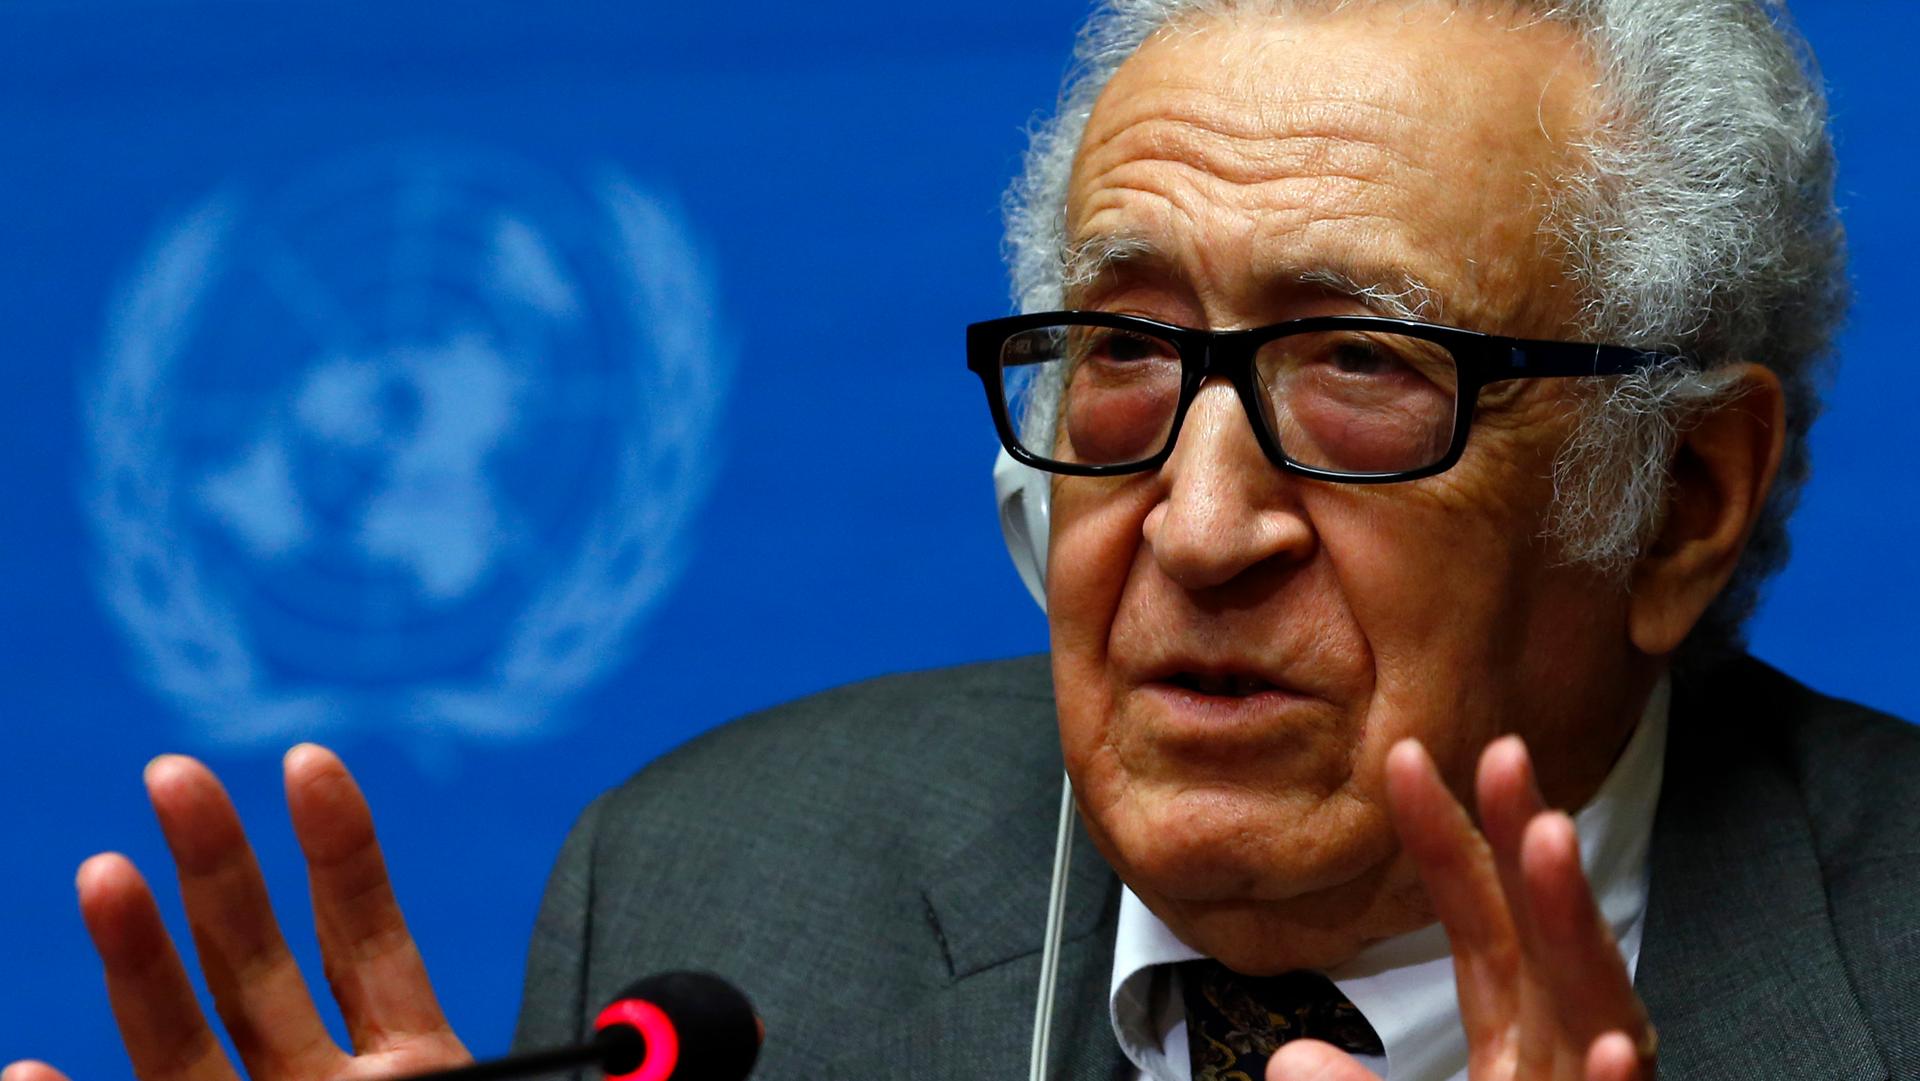 UN-Arab League envoy for Syria Lakhdar Brahimi addresses a news conference at the United Nations European headquarters in Geneva.